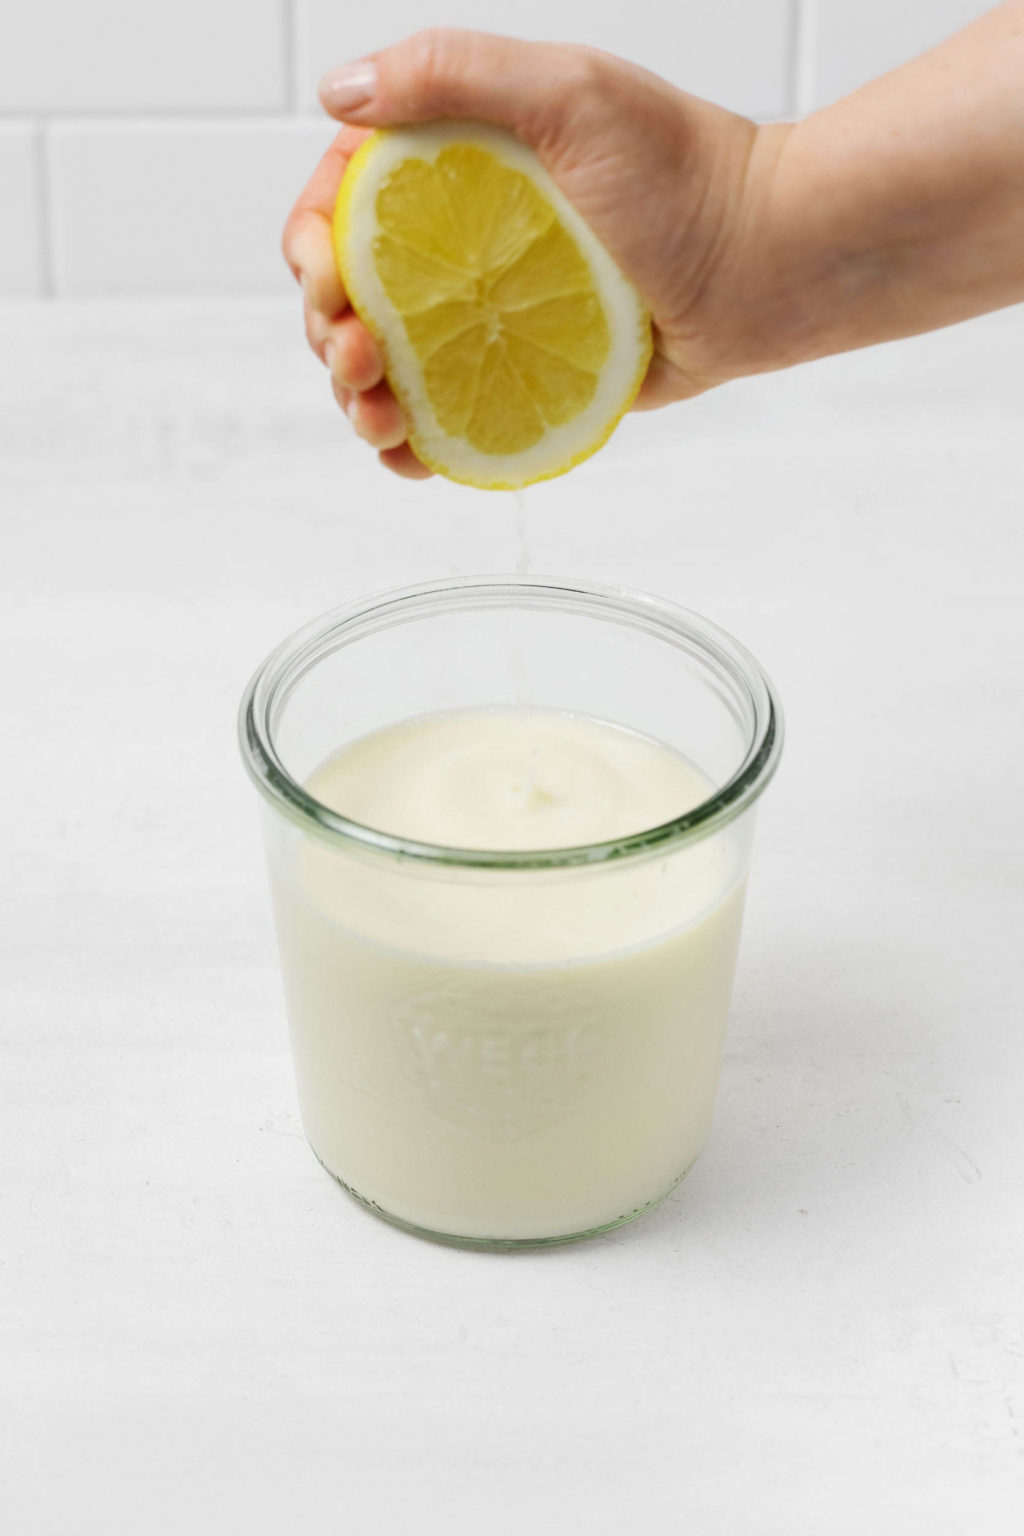 A lemon is being squeezed into a mason jar full of milk. It rests on a white surface.